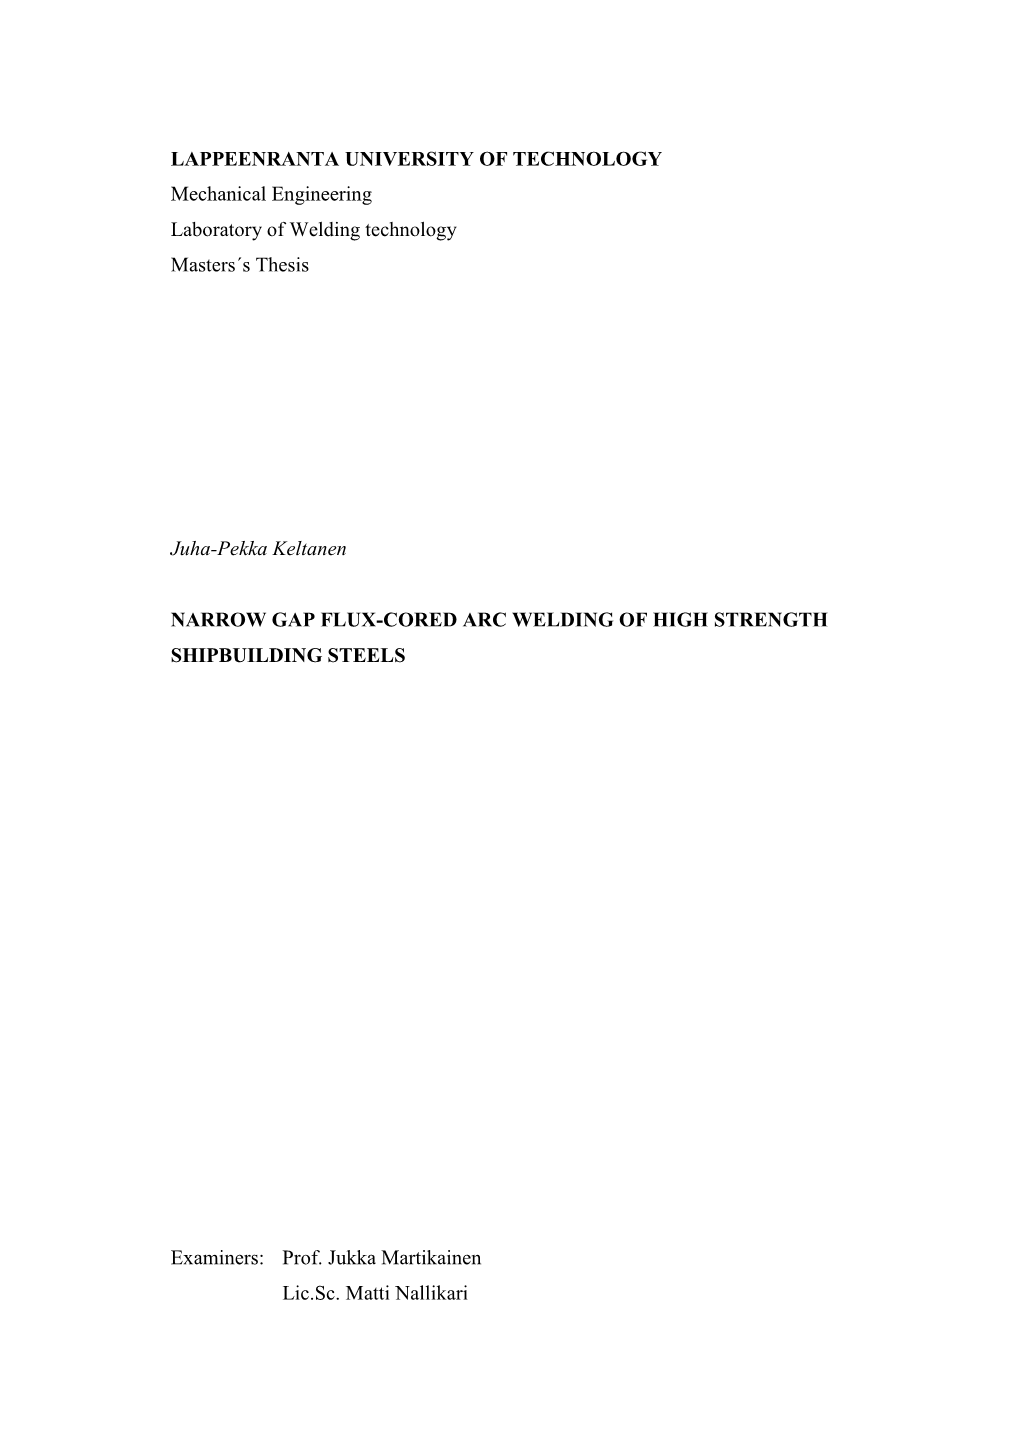 Thesis NG FCAW of High Strength Shipbuilding Steels .Pdf